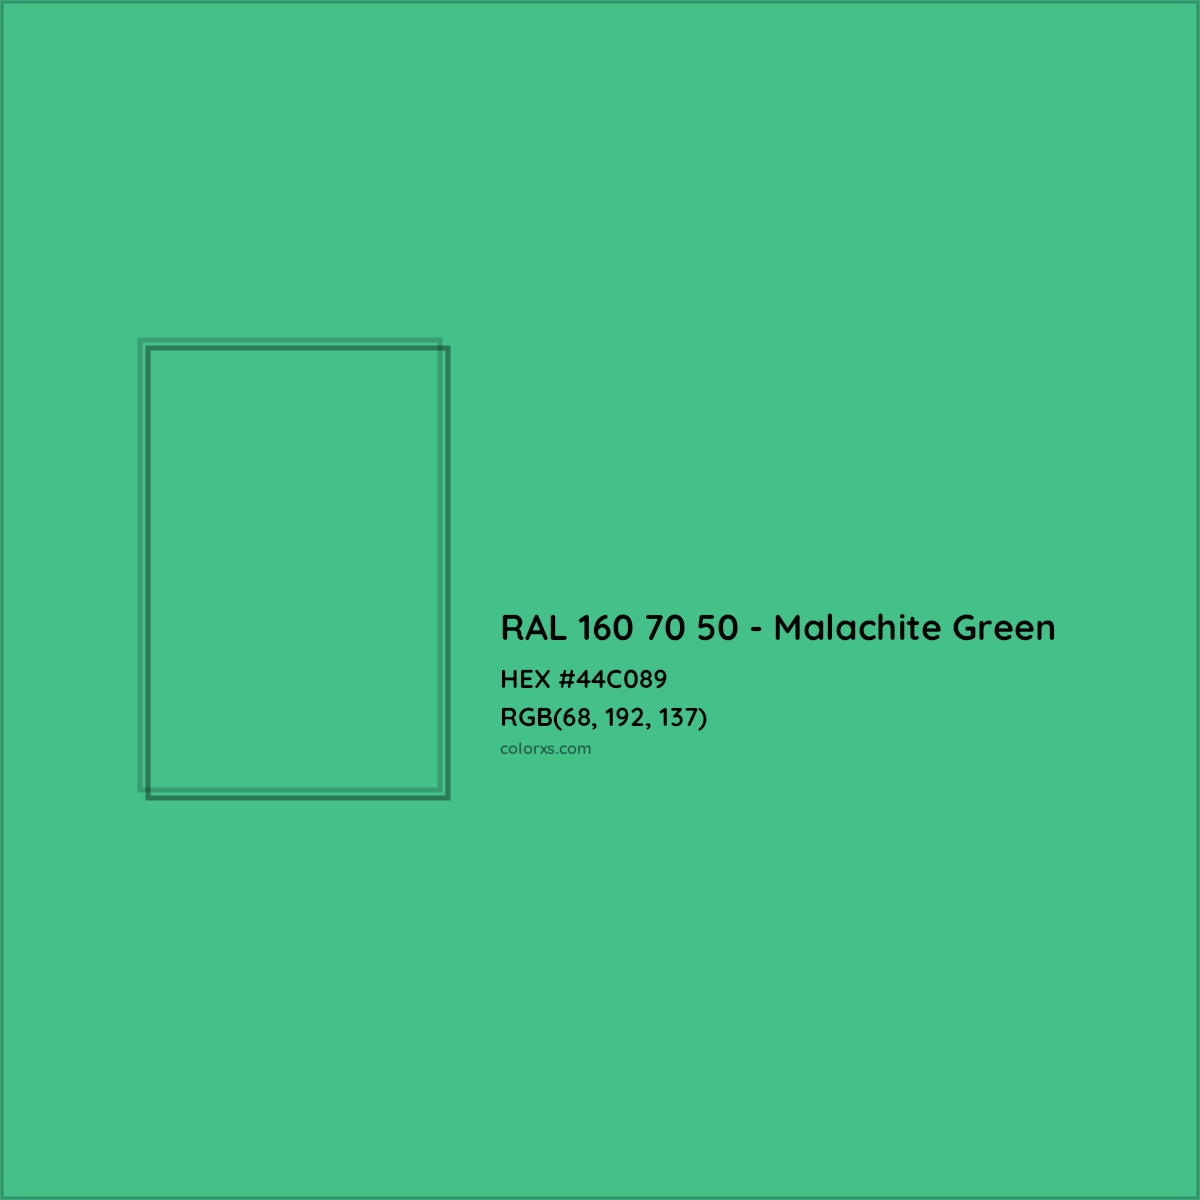 HEX #44C089 RAL 160 70 50 - Malachite Green CMS RAL Design - Color Code